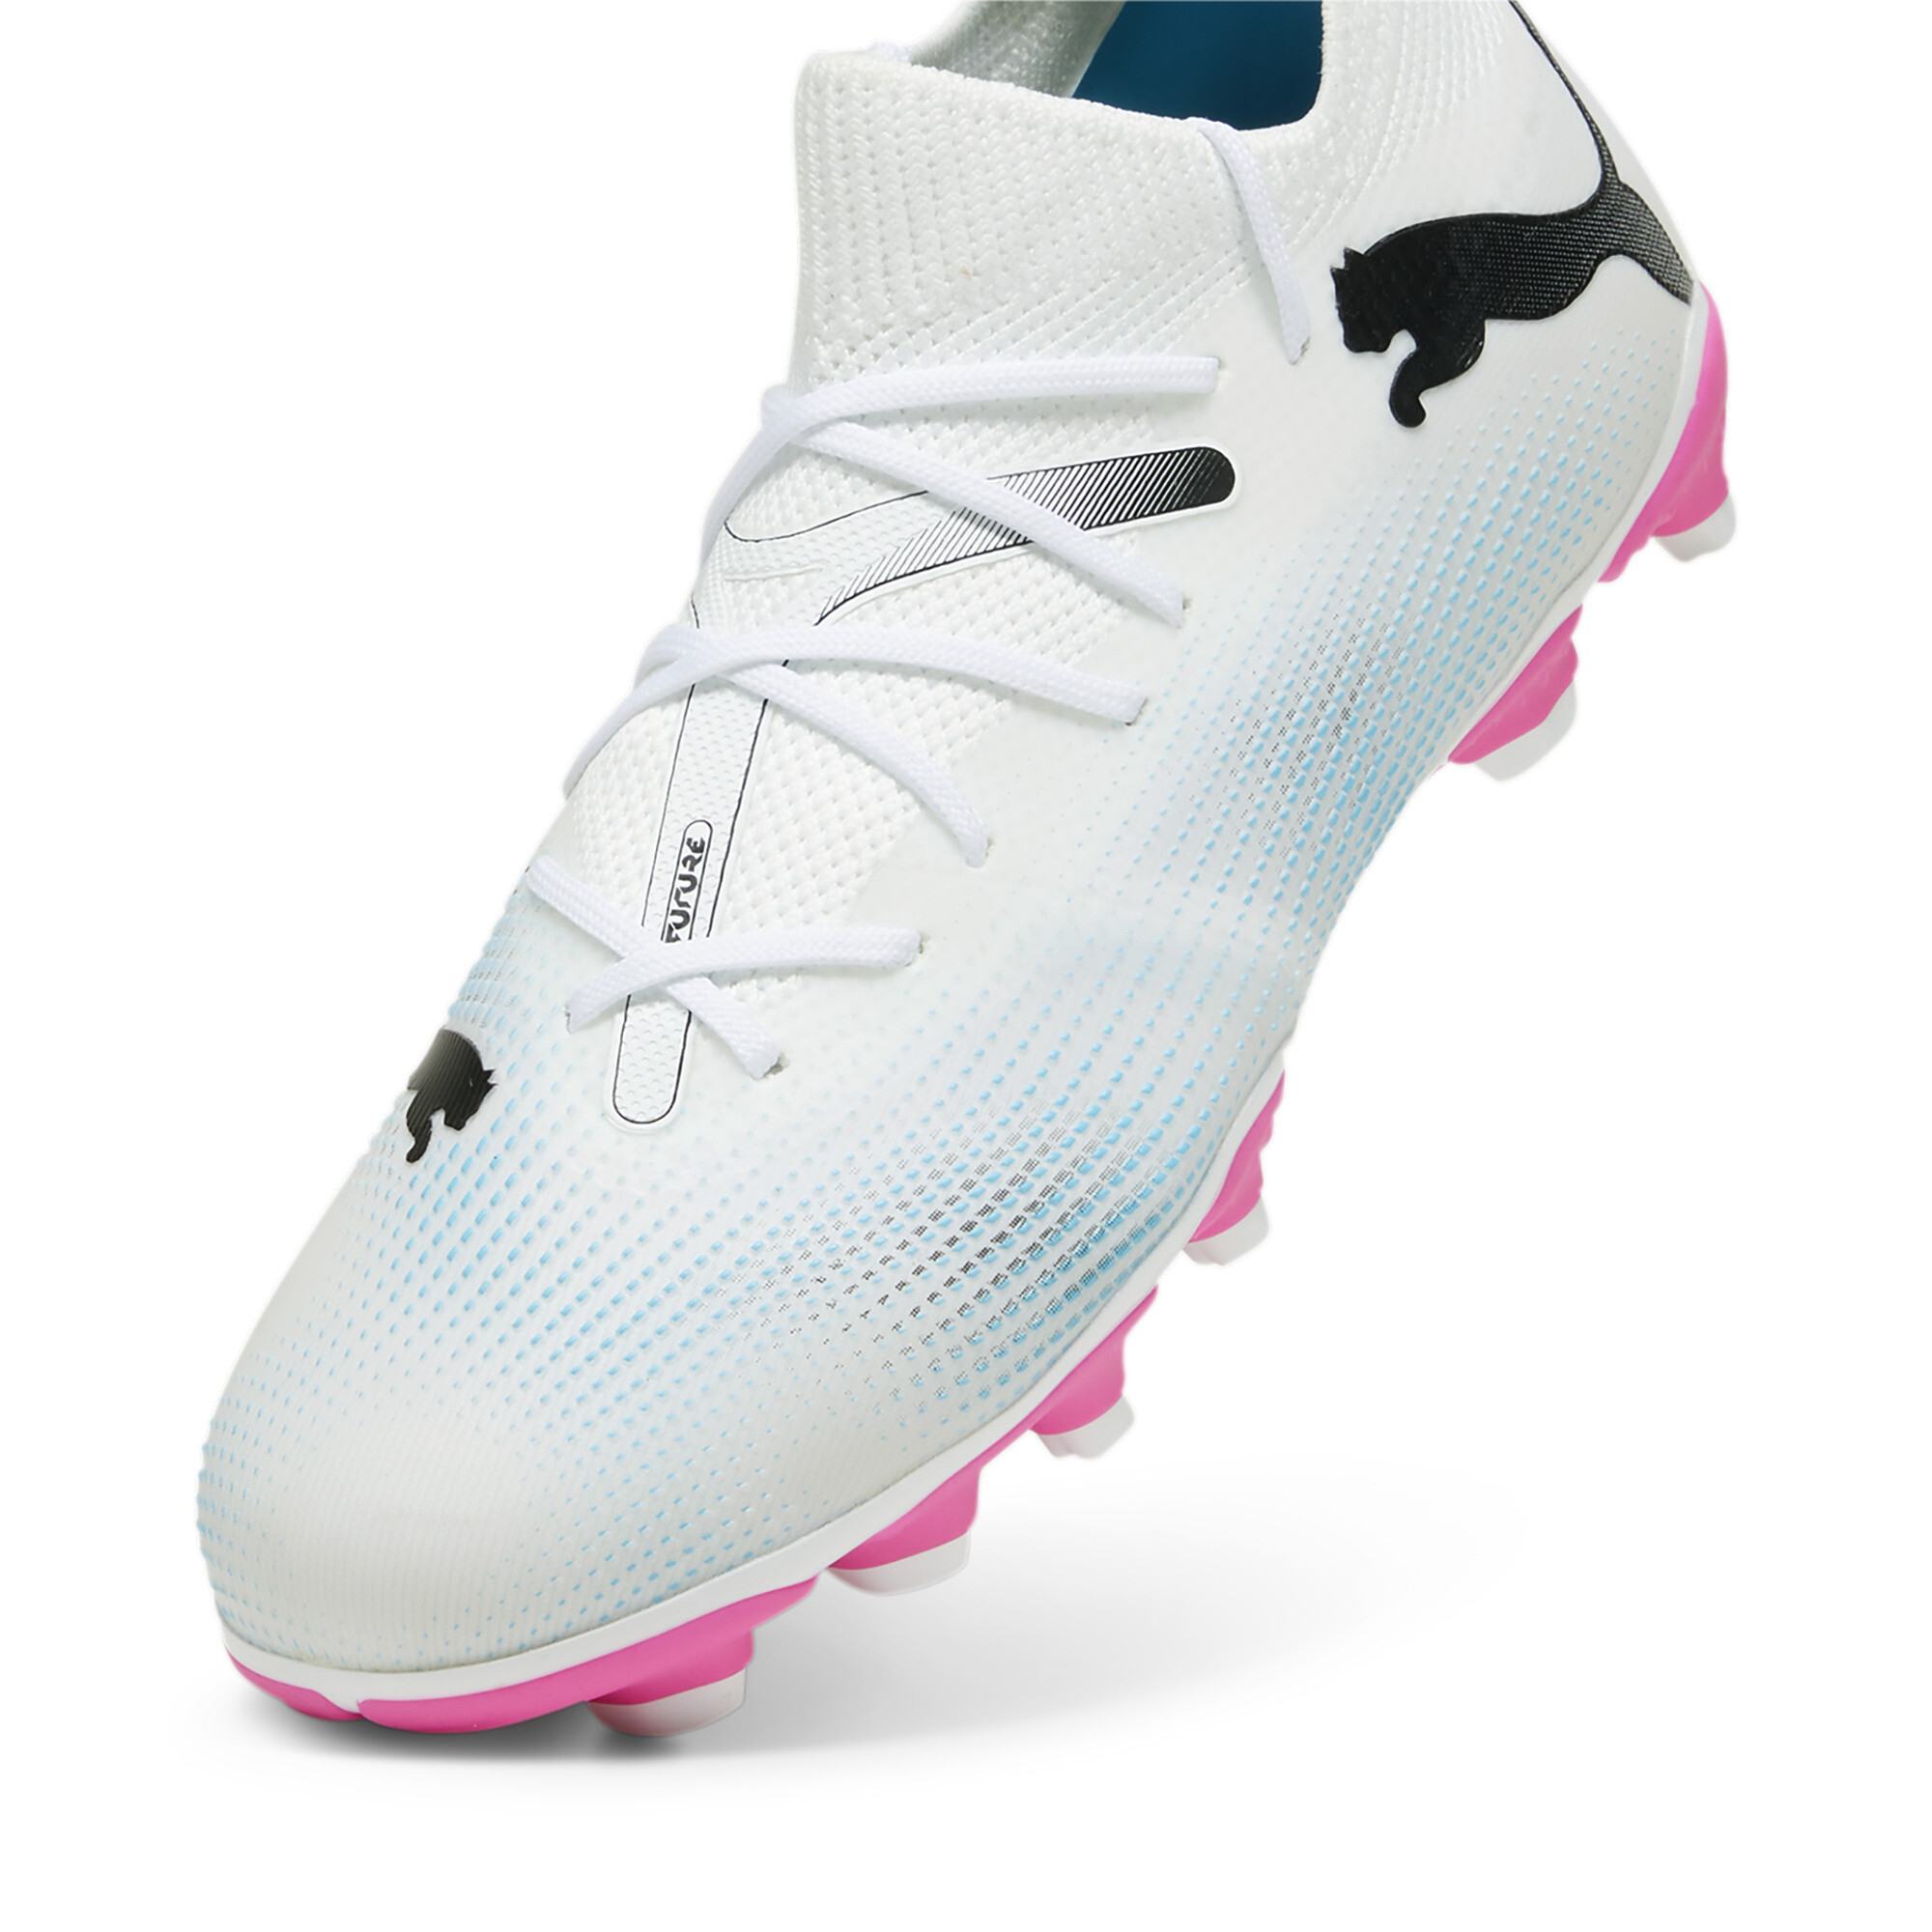 PUMA FUTURE 7 MATCH FG/AG Youth Football Boots In White/Pink, Size EU 36